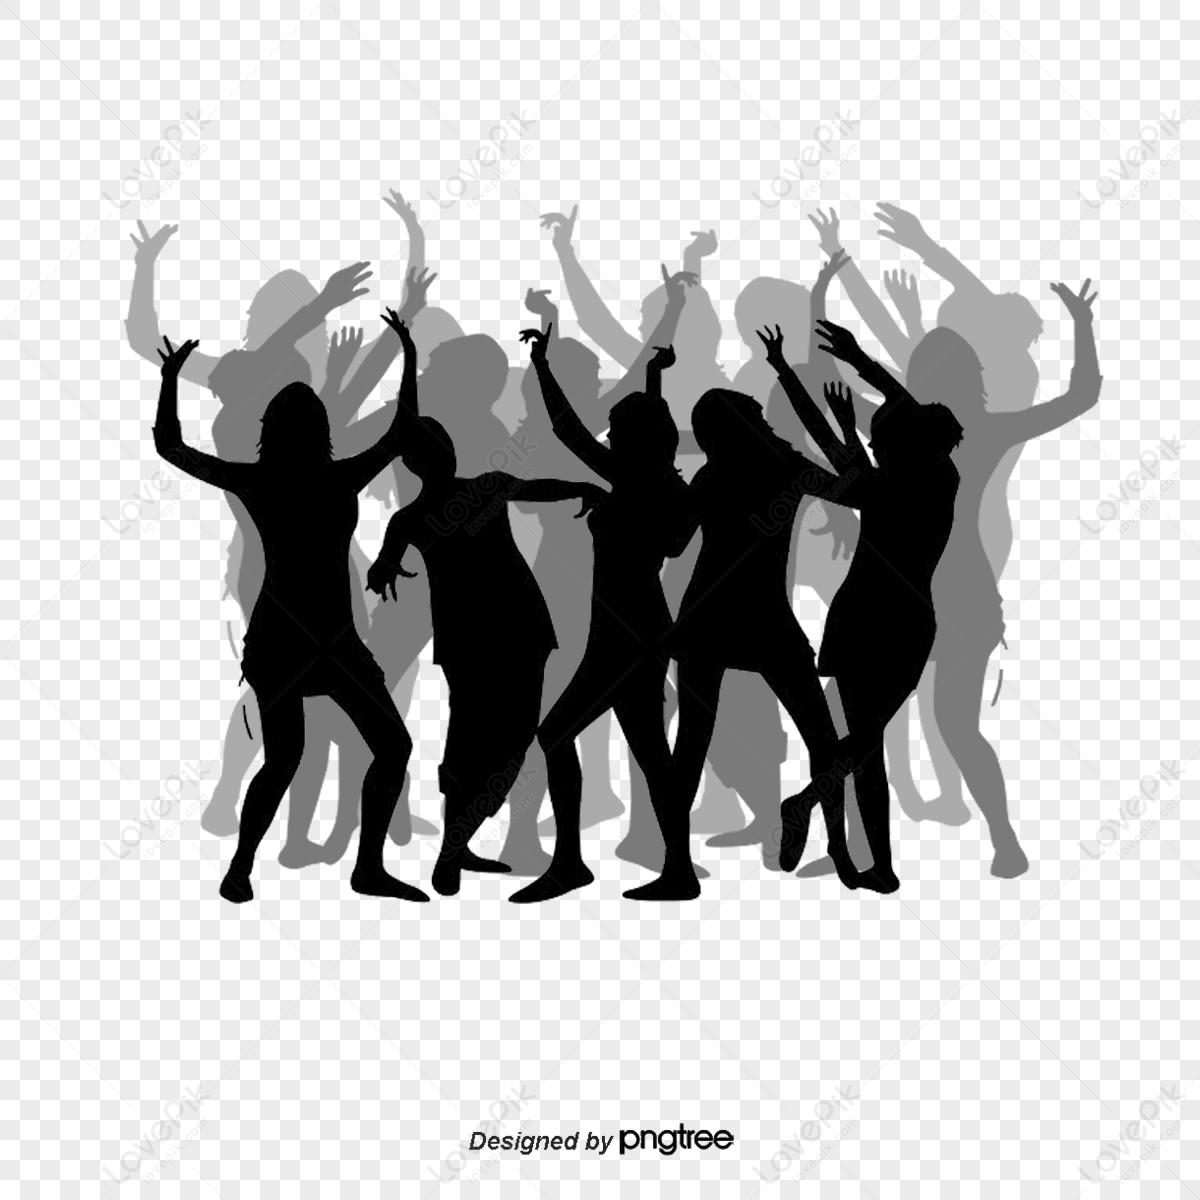 happy people silhouette png